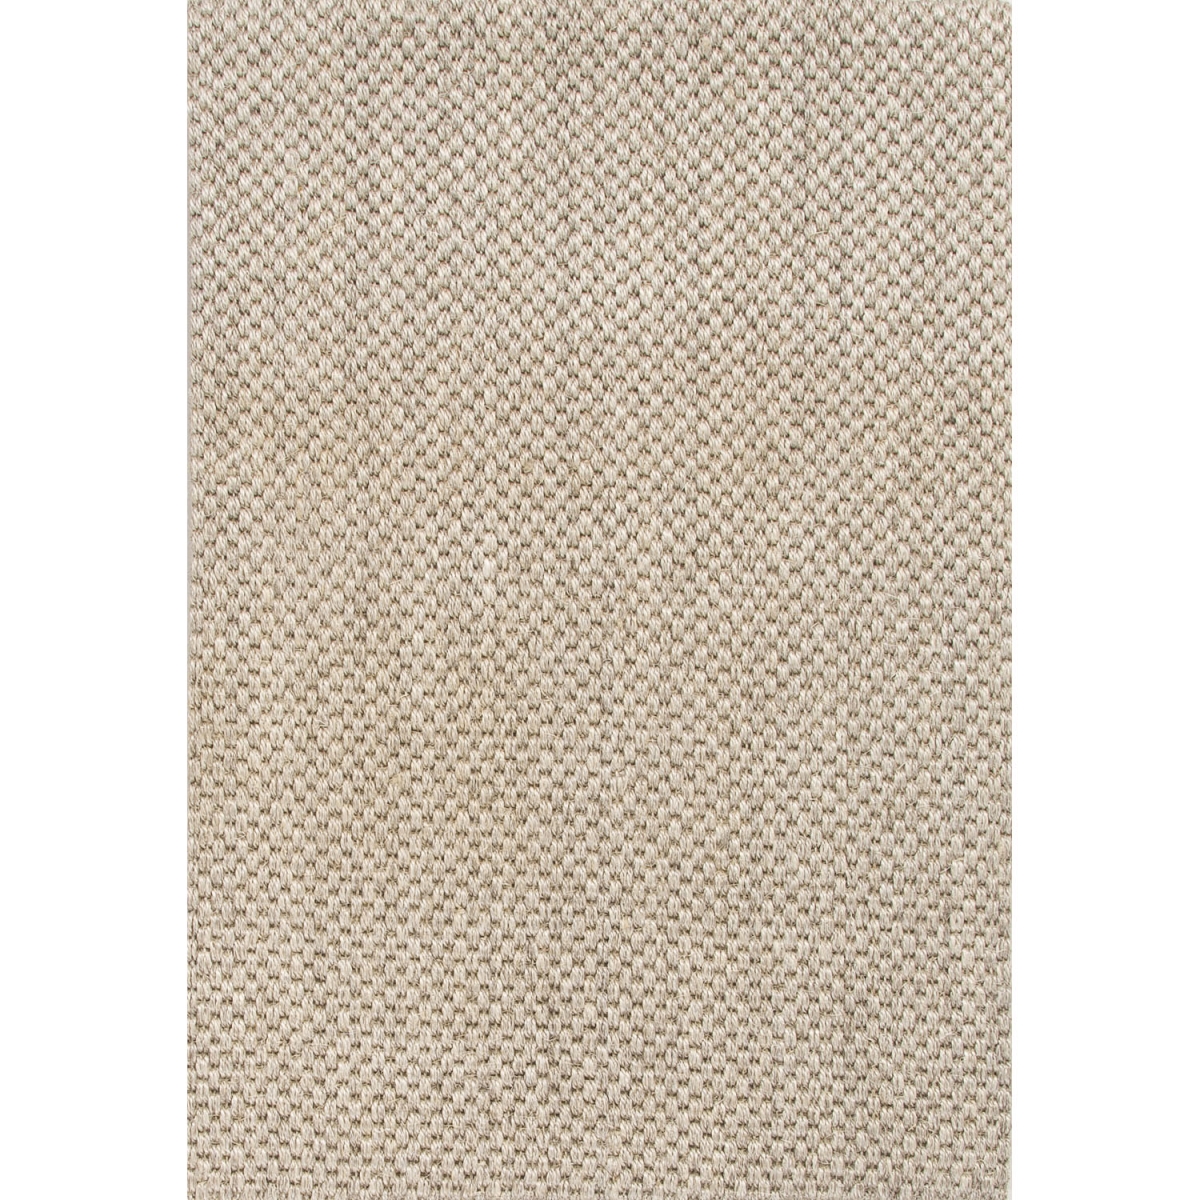 Picture of Jaipur Rugs RUG134576 Naturals Sanibel 2.35Kg by M2 Naples Design Rectangle Rug, White Asparagus - 9 ft. 6 in. x 13 ft. 6 in.